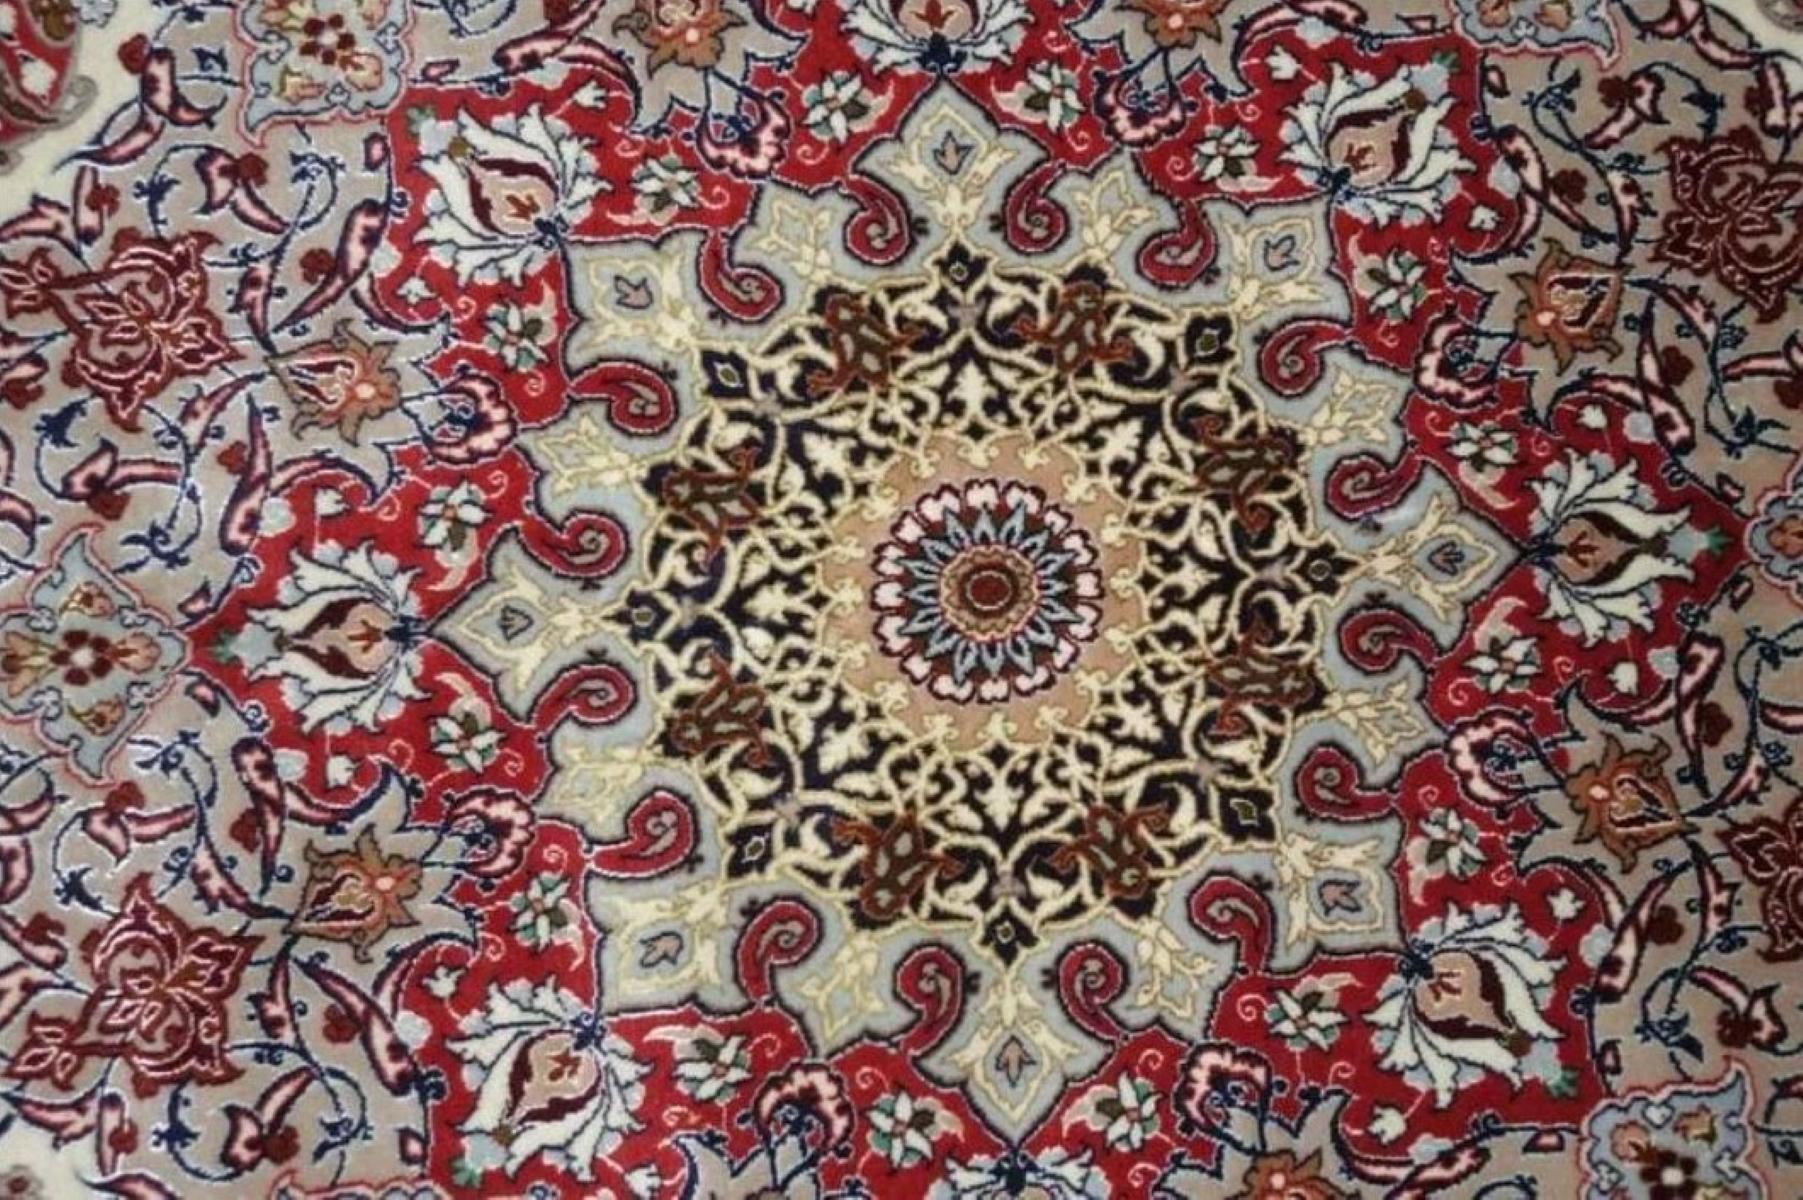 Very fine Persian Isfahan Silk & Wool Rug - 10' x 13' For Sale 1